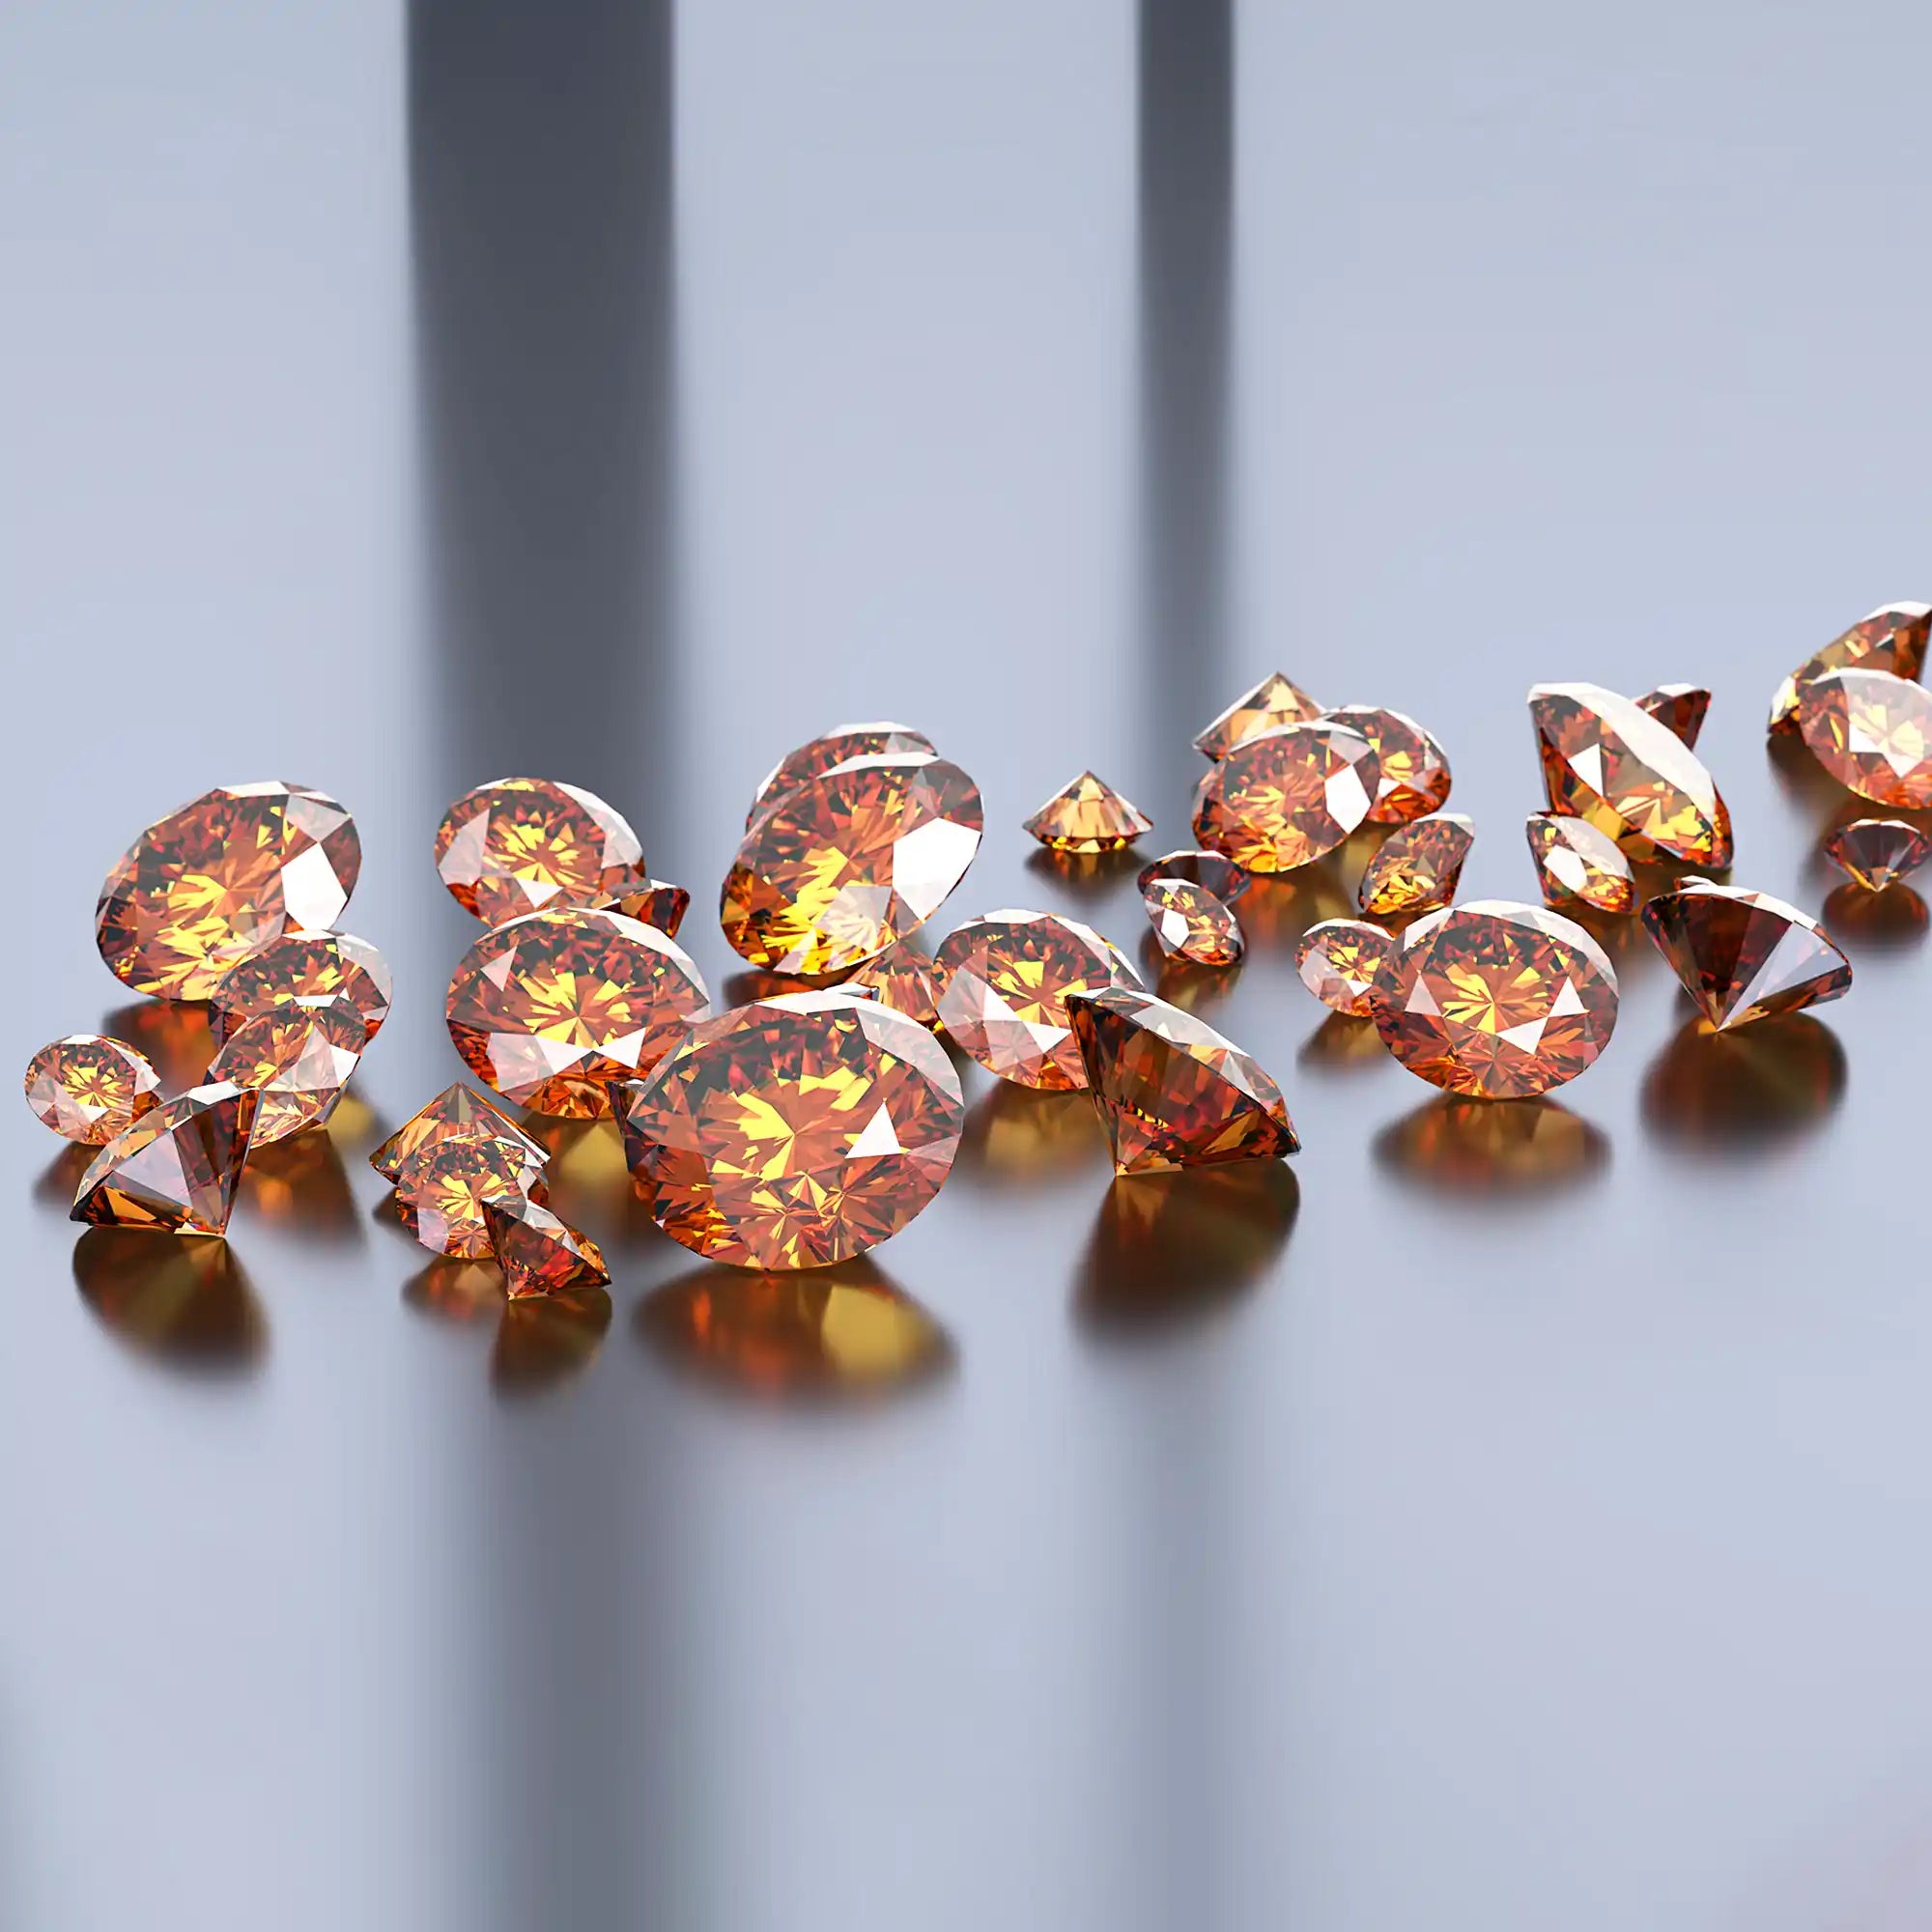 Chocolate diamonds are rare to get with their natural formation